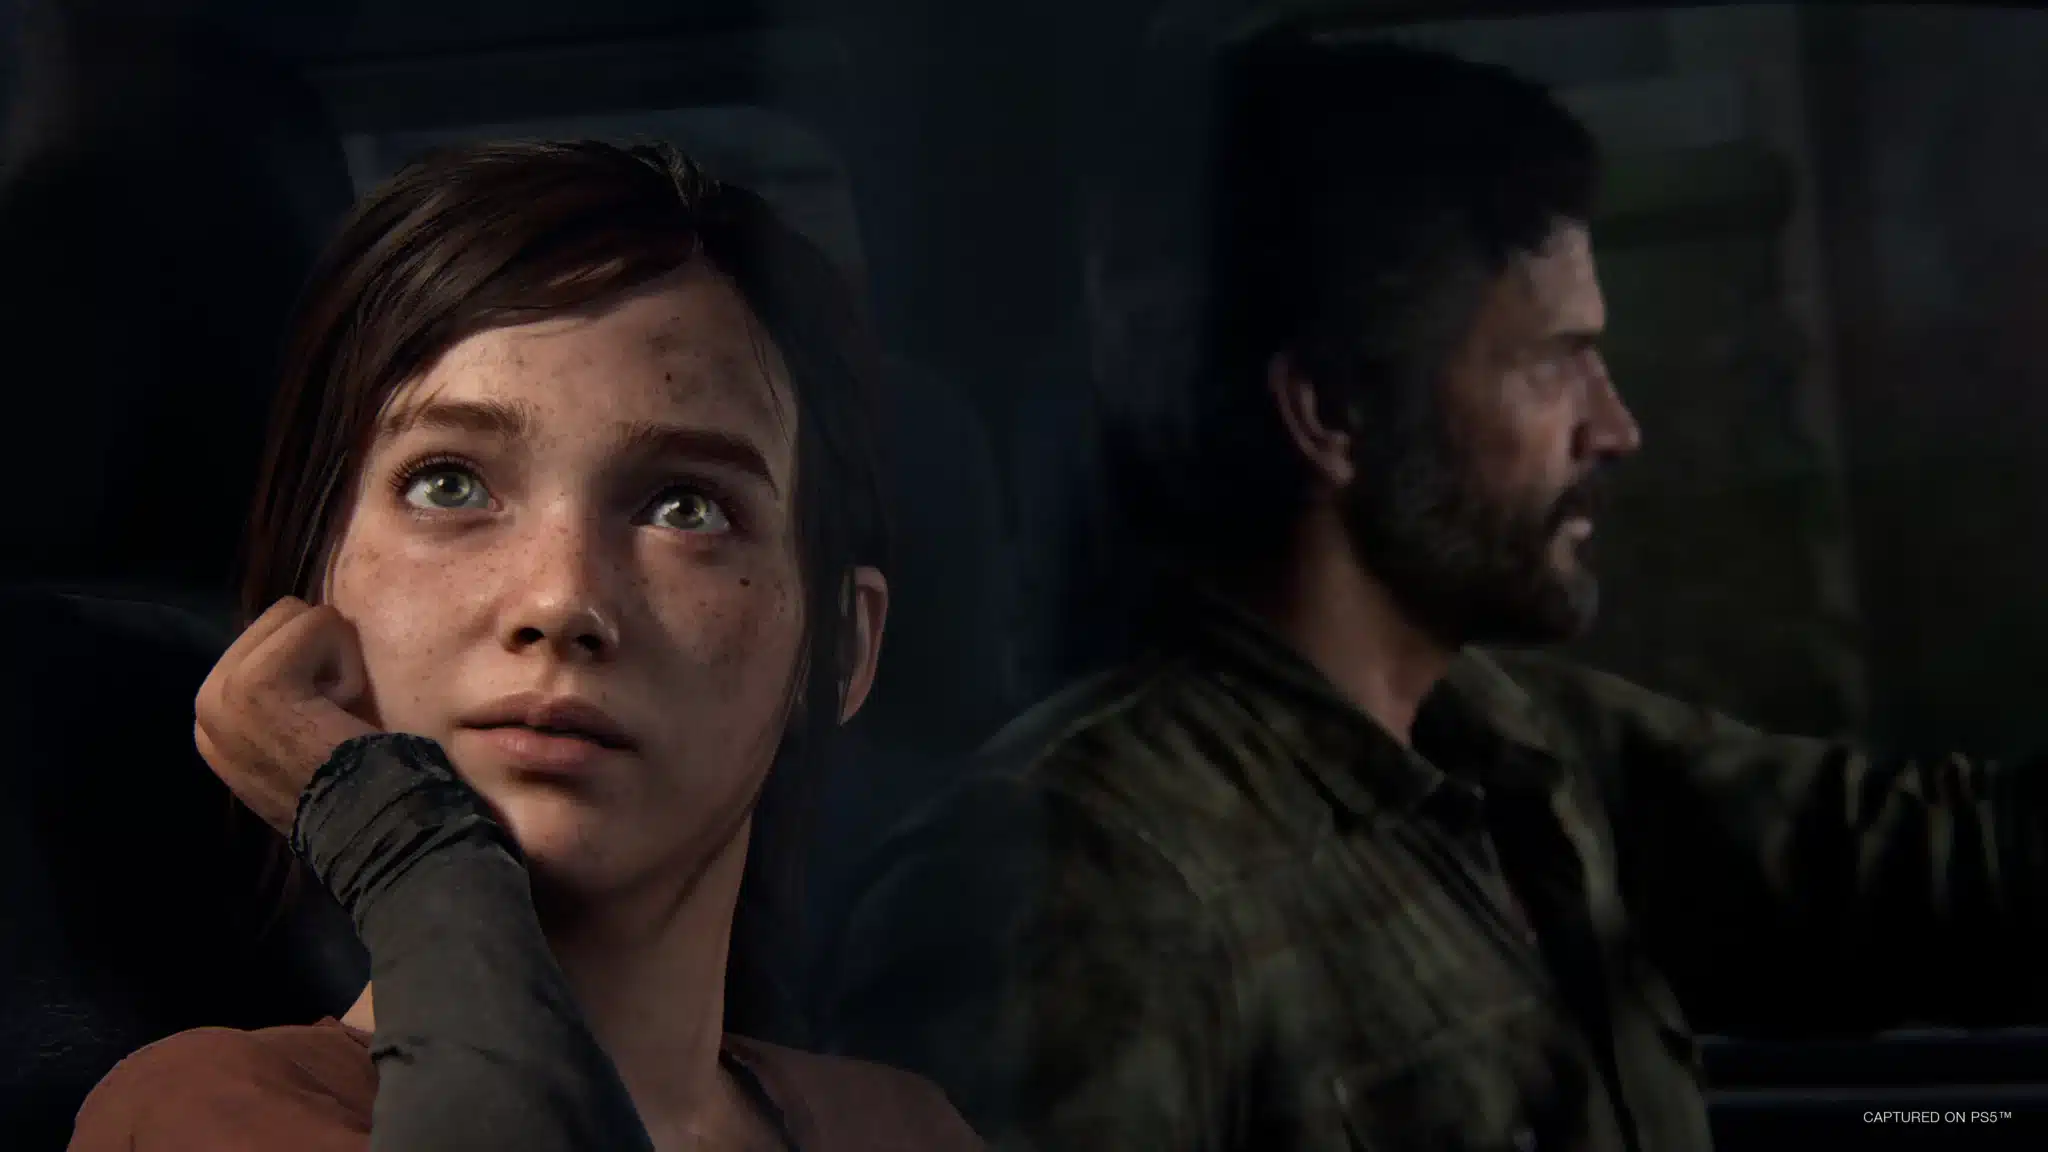 The Last of Us Episode 9 Release Date, Time, Channel, Plot, and Watch Online